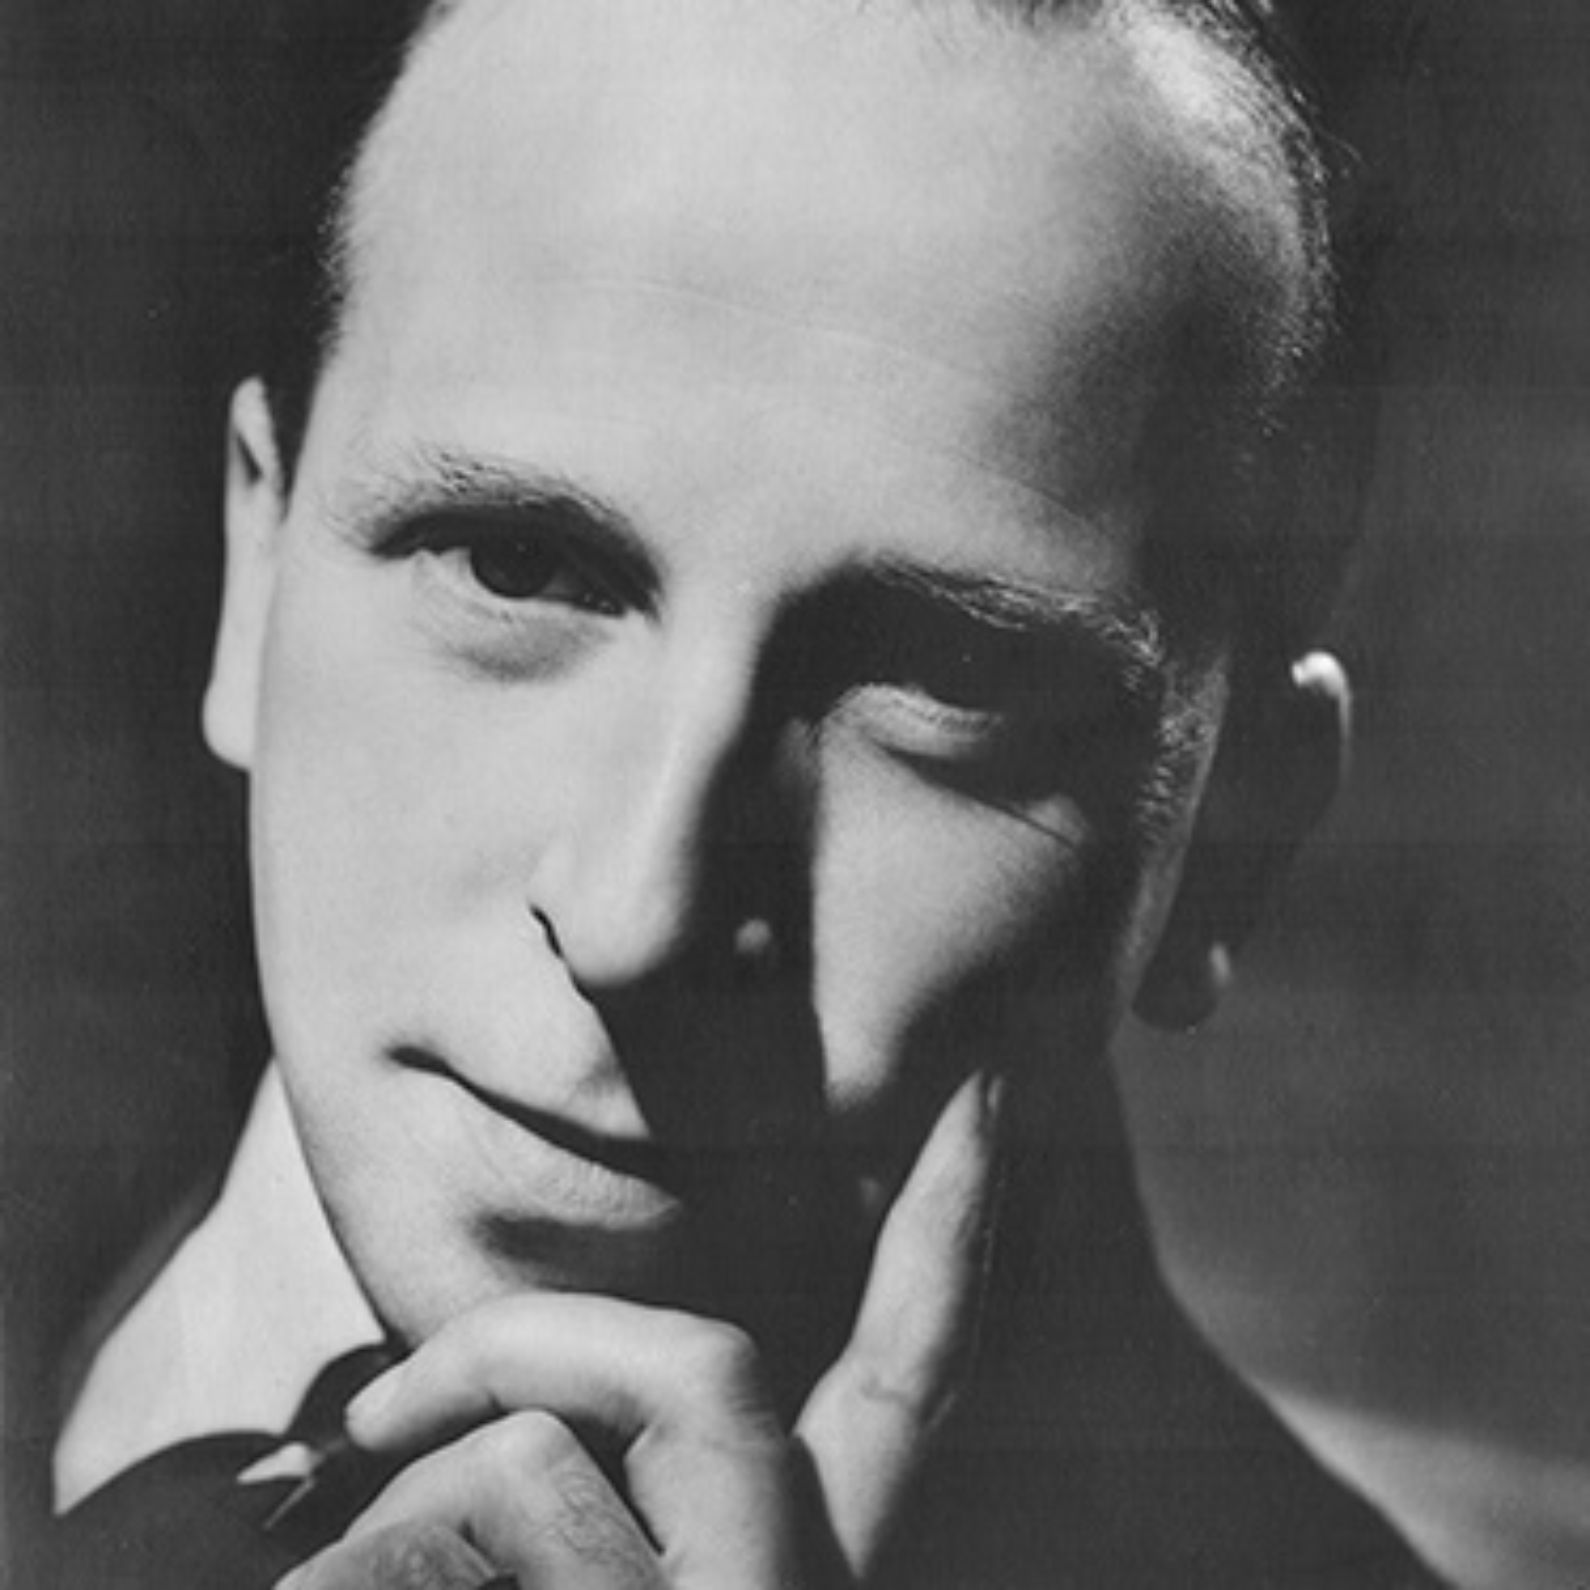 A portrait of theatre founder John Stewart in black and white with one hand placed upon his face and looking directly into camera